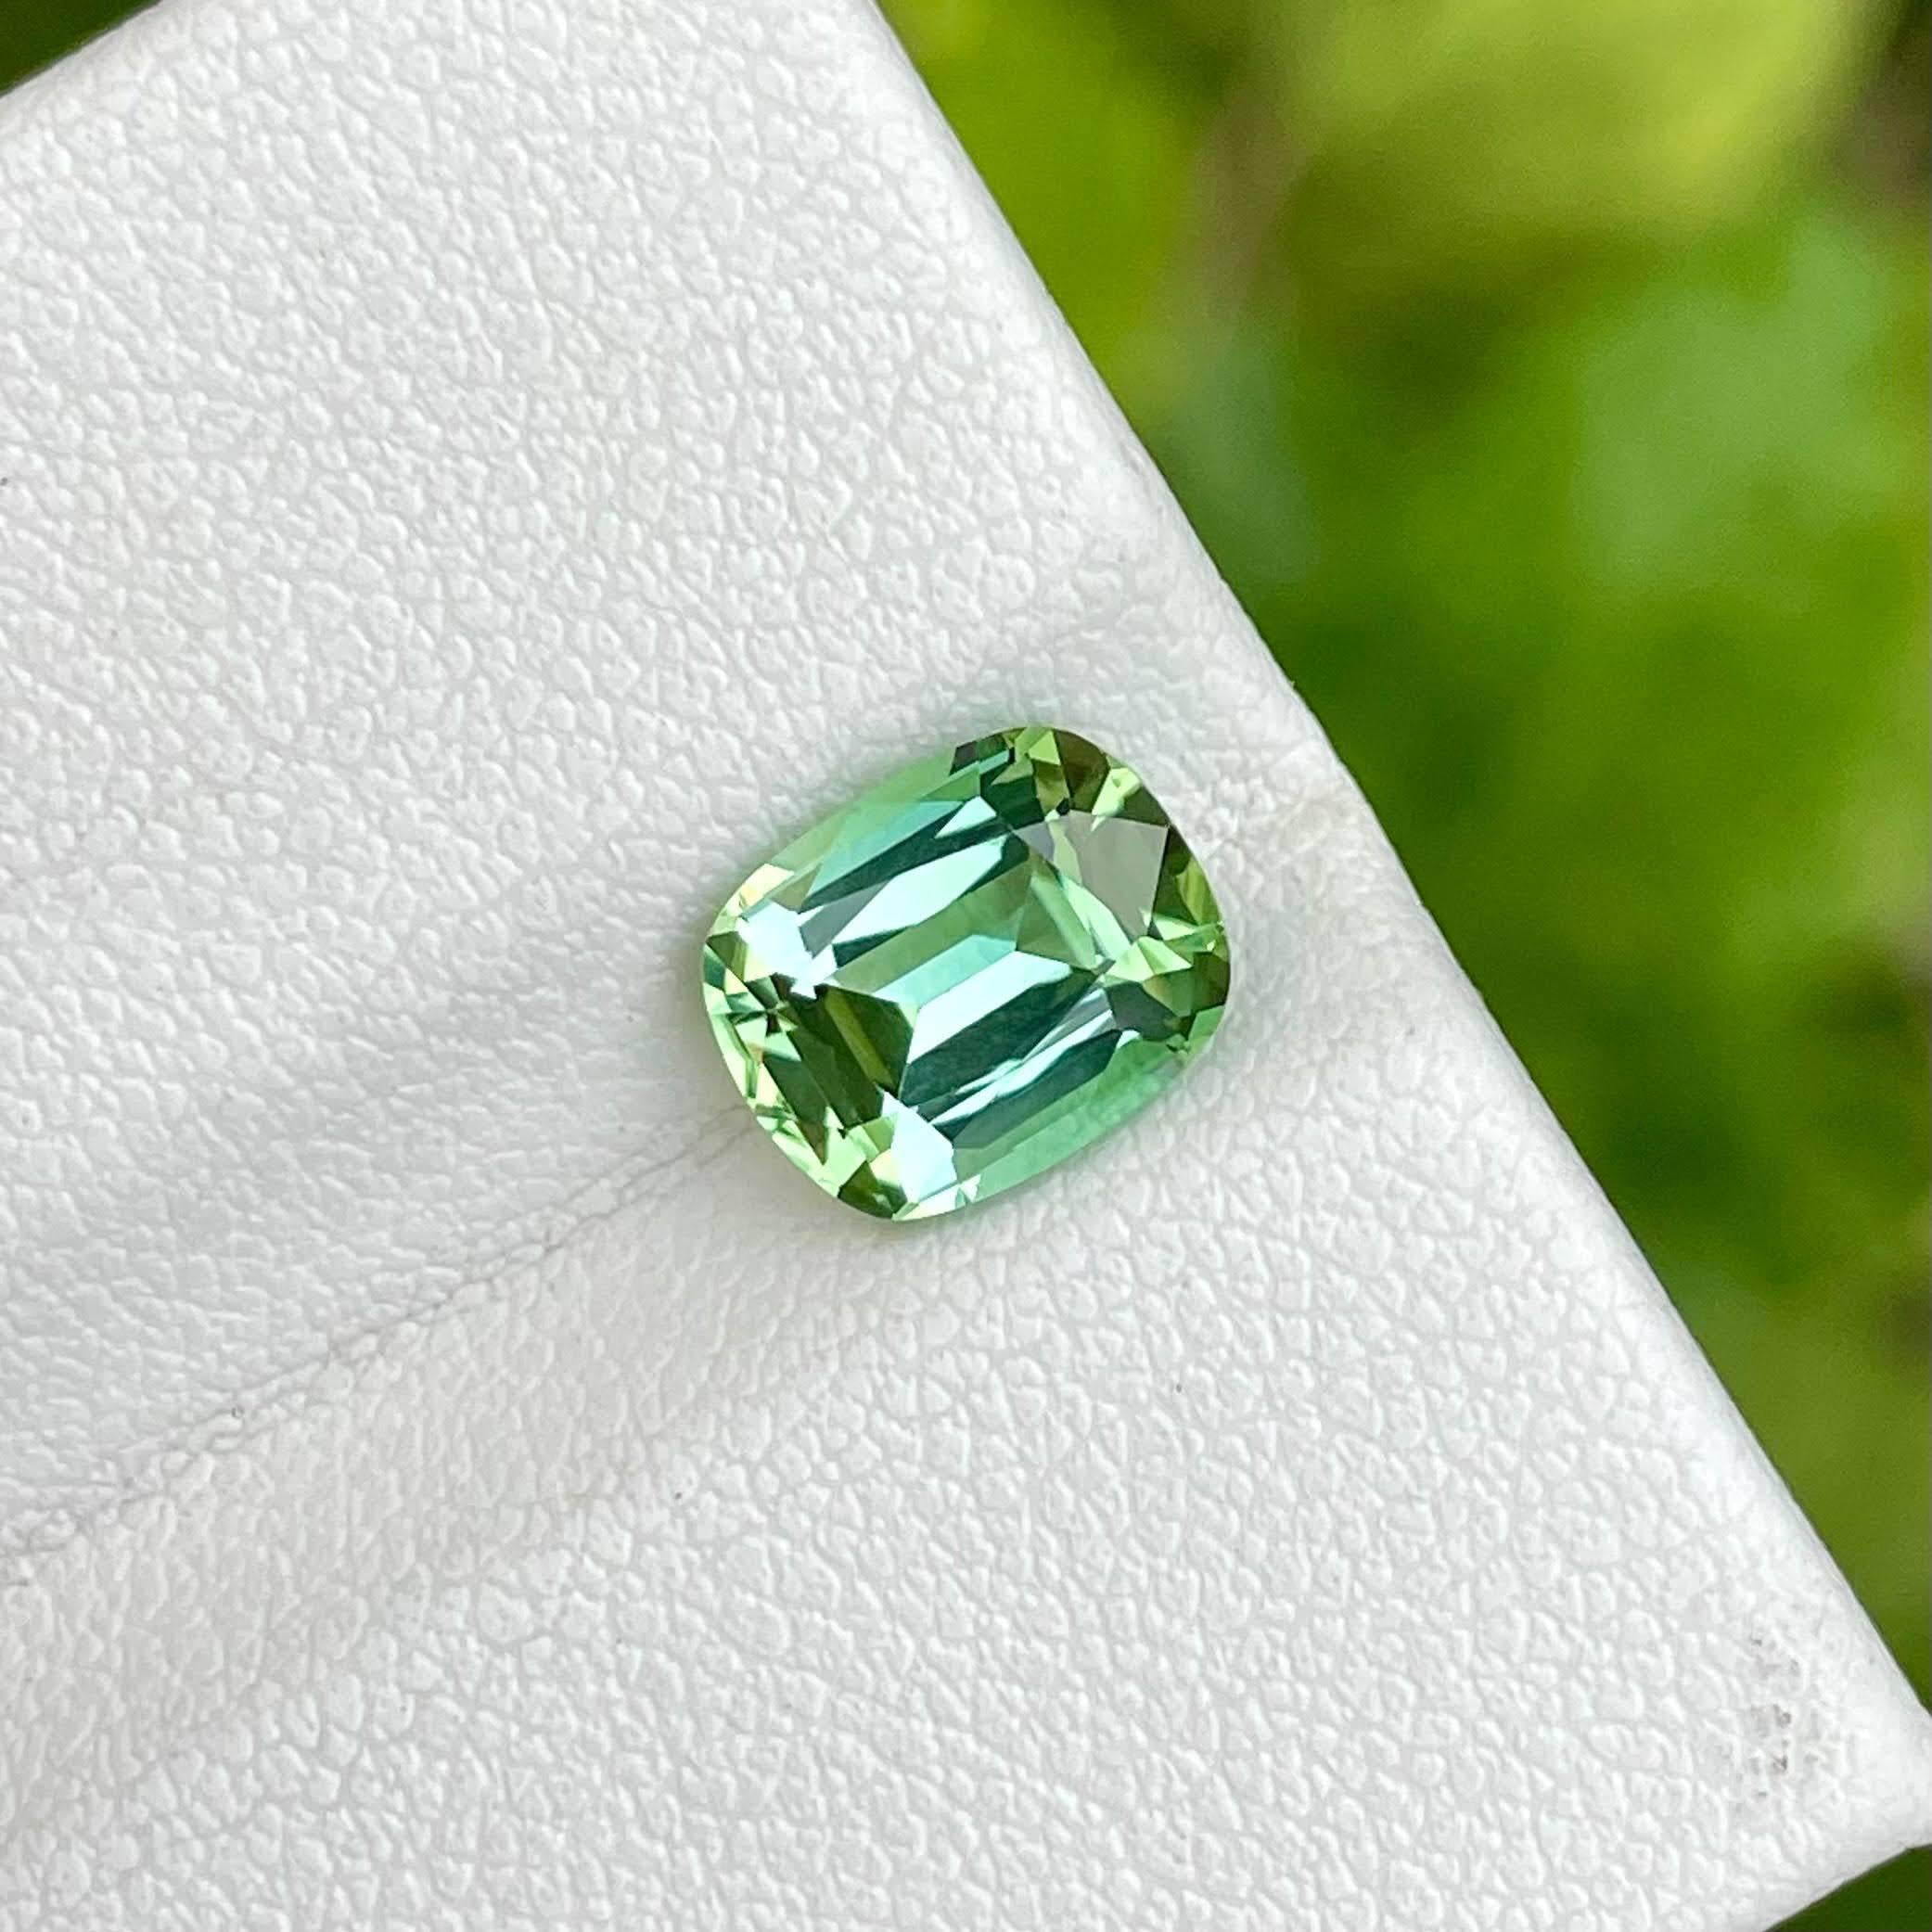 Weight 2.05 carats 
Dimensions 8.6x7.1x5.0 mm
Treatment none 
Origin Afghanistan 
Clarity eye clean 
Shape cushion 
Cut fancy cushion 



The 2.05 carat Mint Green Tourmaline stone, meticulously cut into a cushion shape, is a striking example of